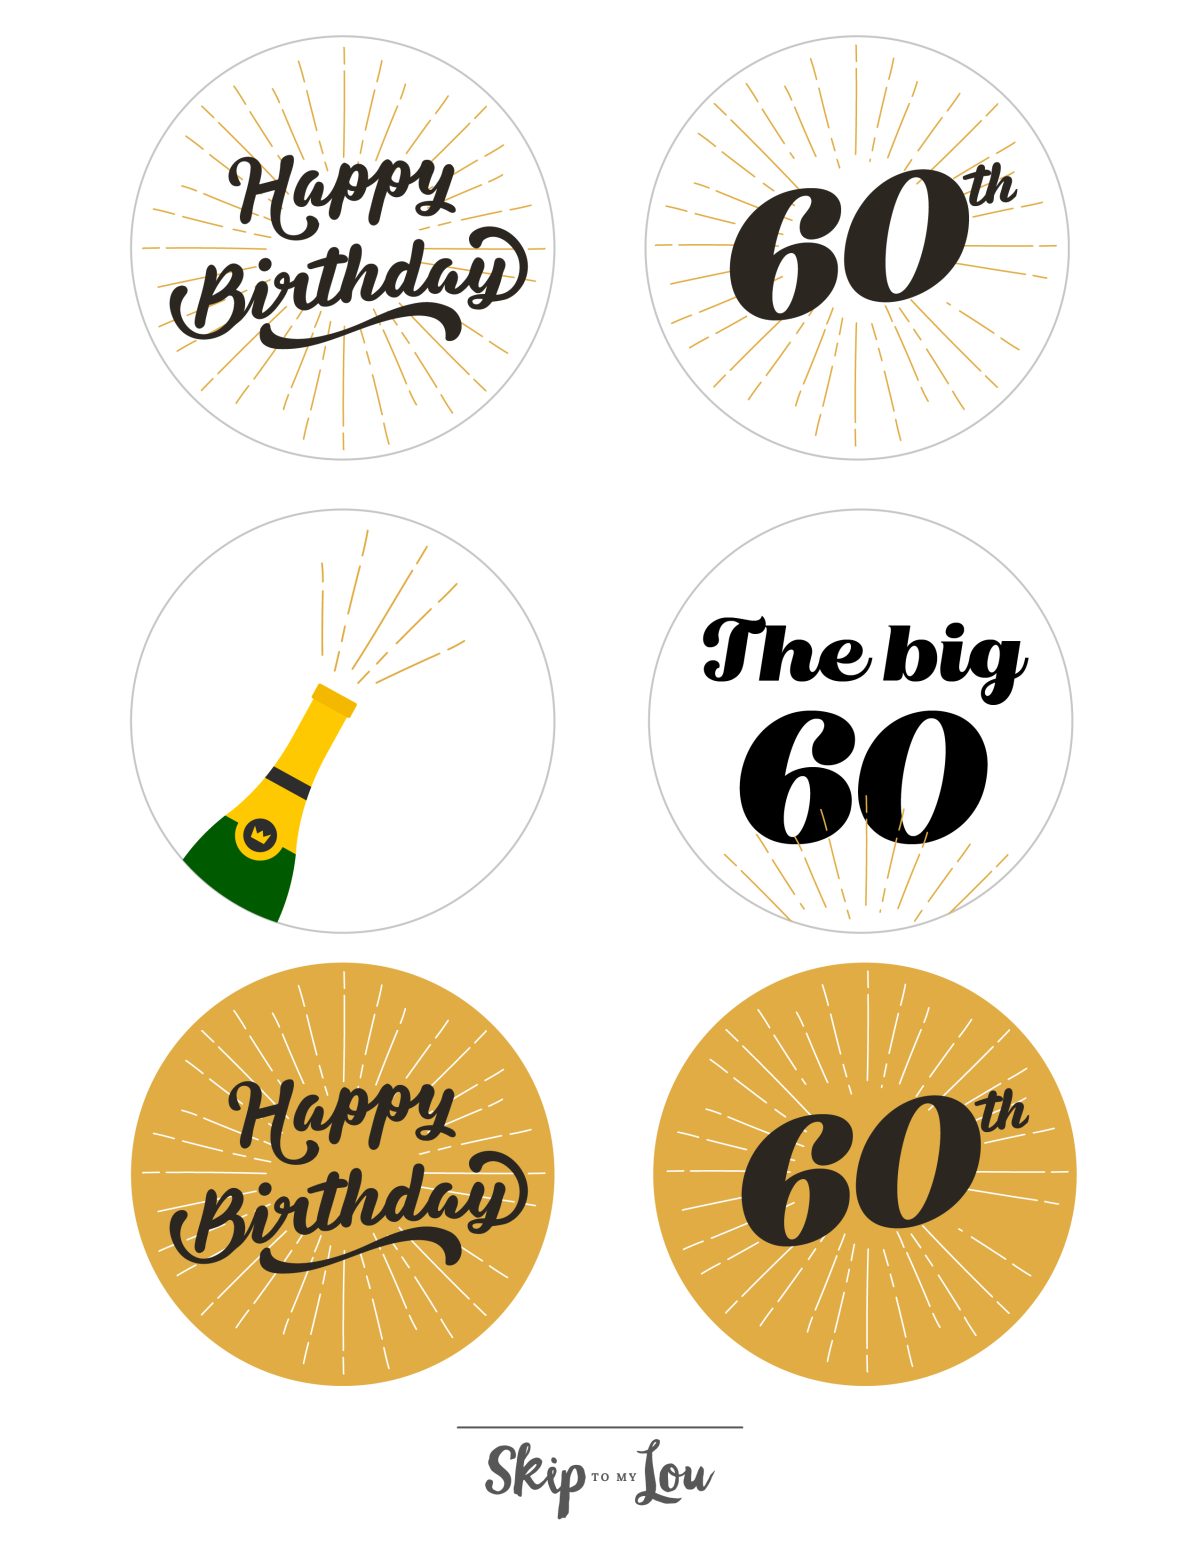 Printable Happy 60th birthday tags that say "happy birthday" "60th" and "the big 60" from Skip to my Lou